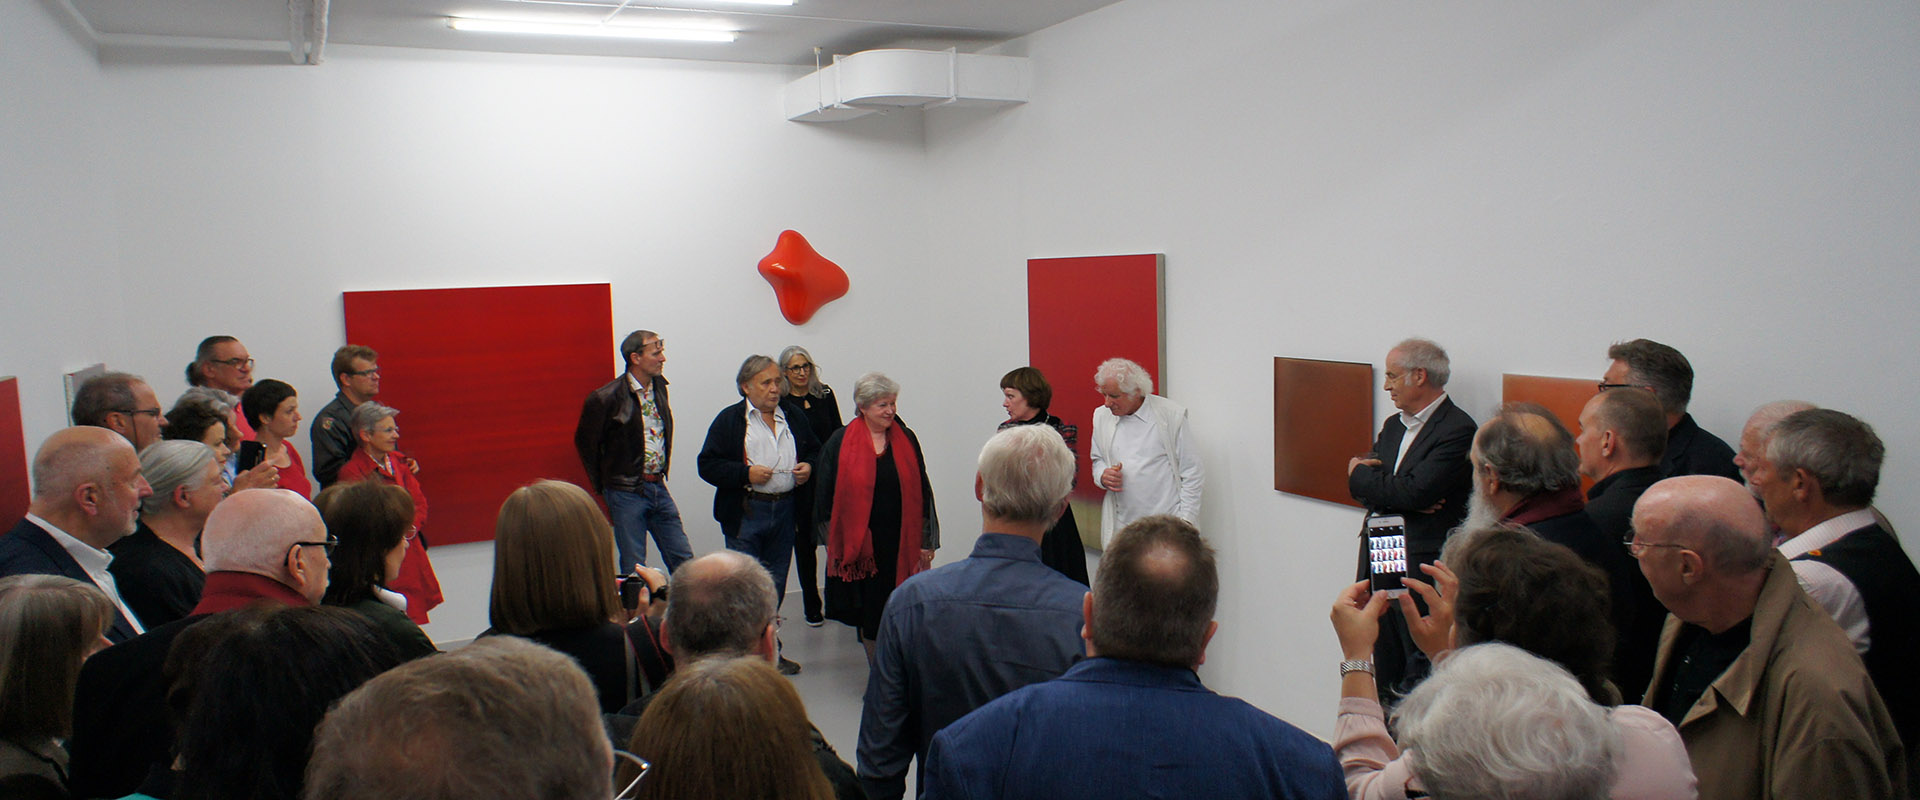 Vernissage "Fifty Shades of Red", Galerie Renate Bender 2016